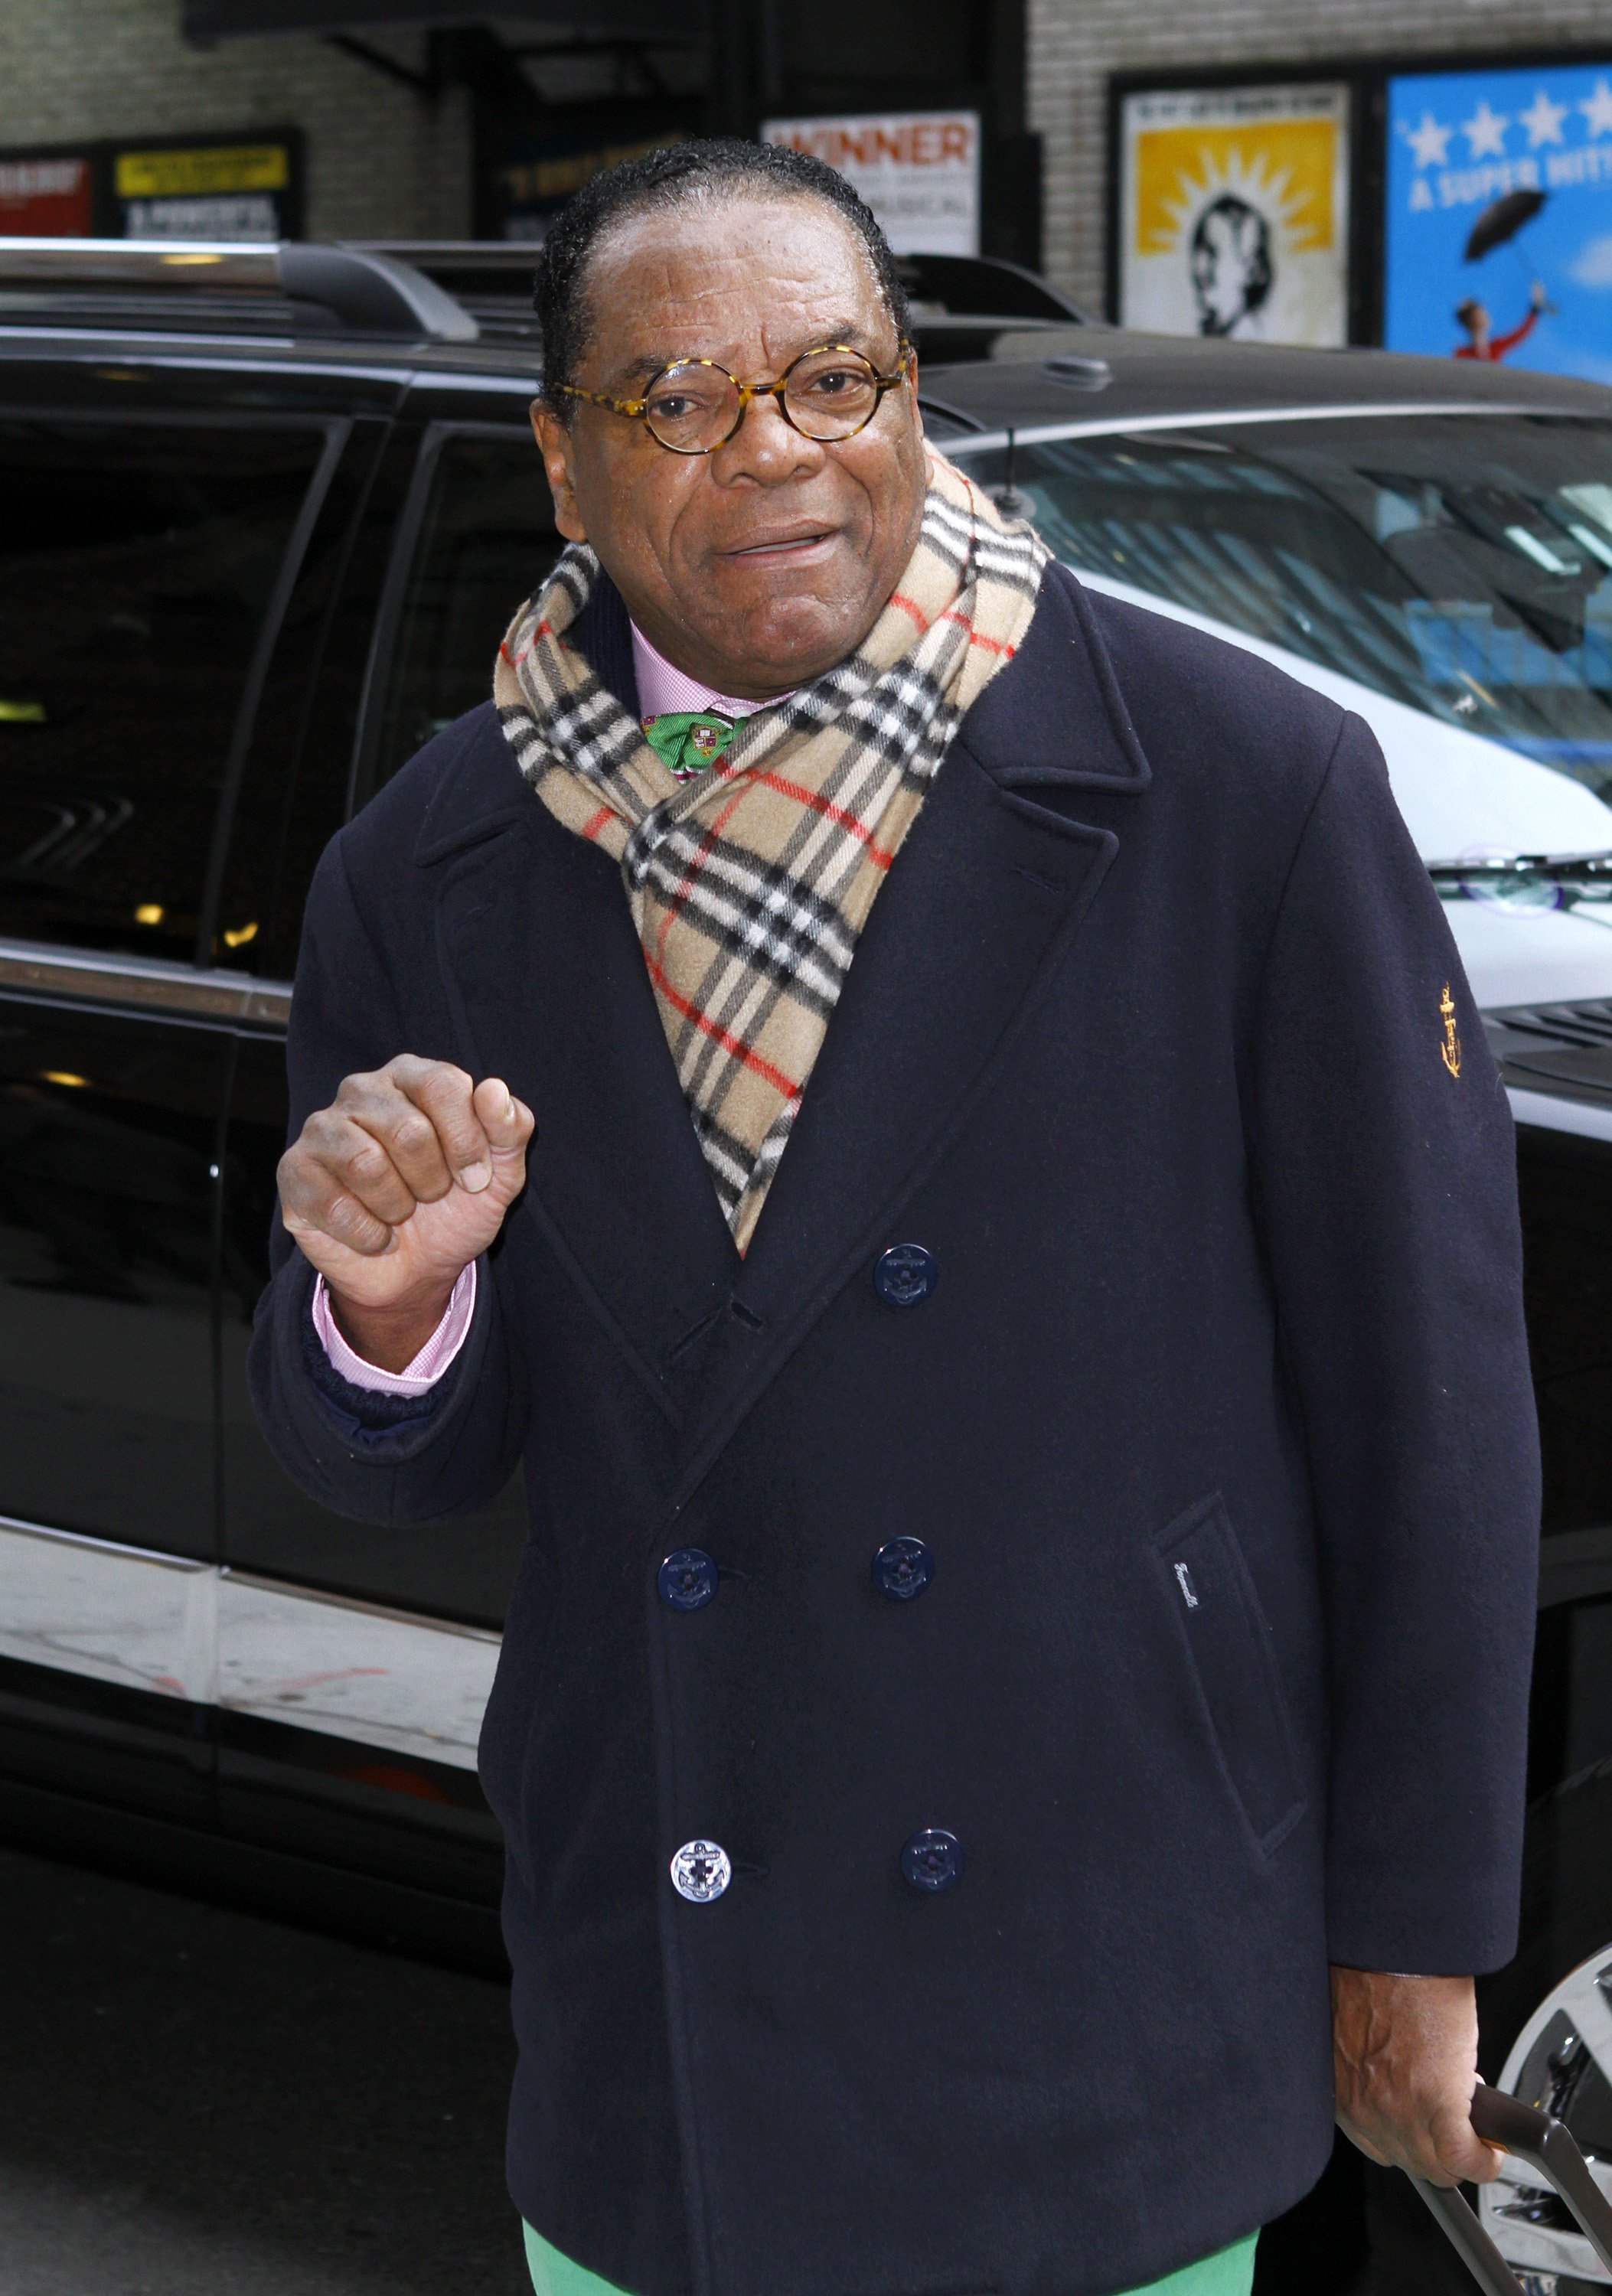 John Witherspoon arrives for "The Late Show with David Letterman" on February 22, 2012 in New York City | Photo: Getty Images